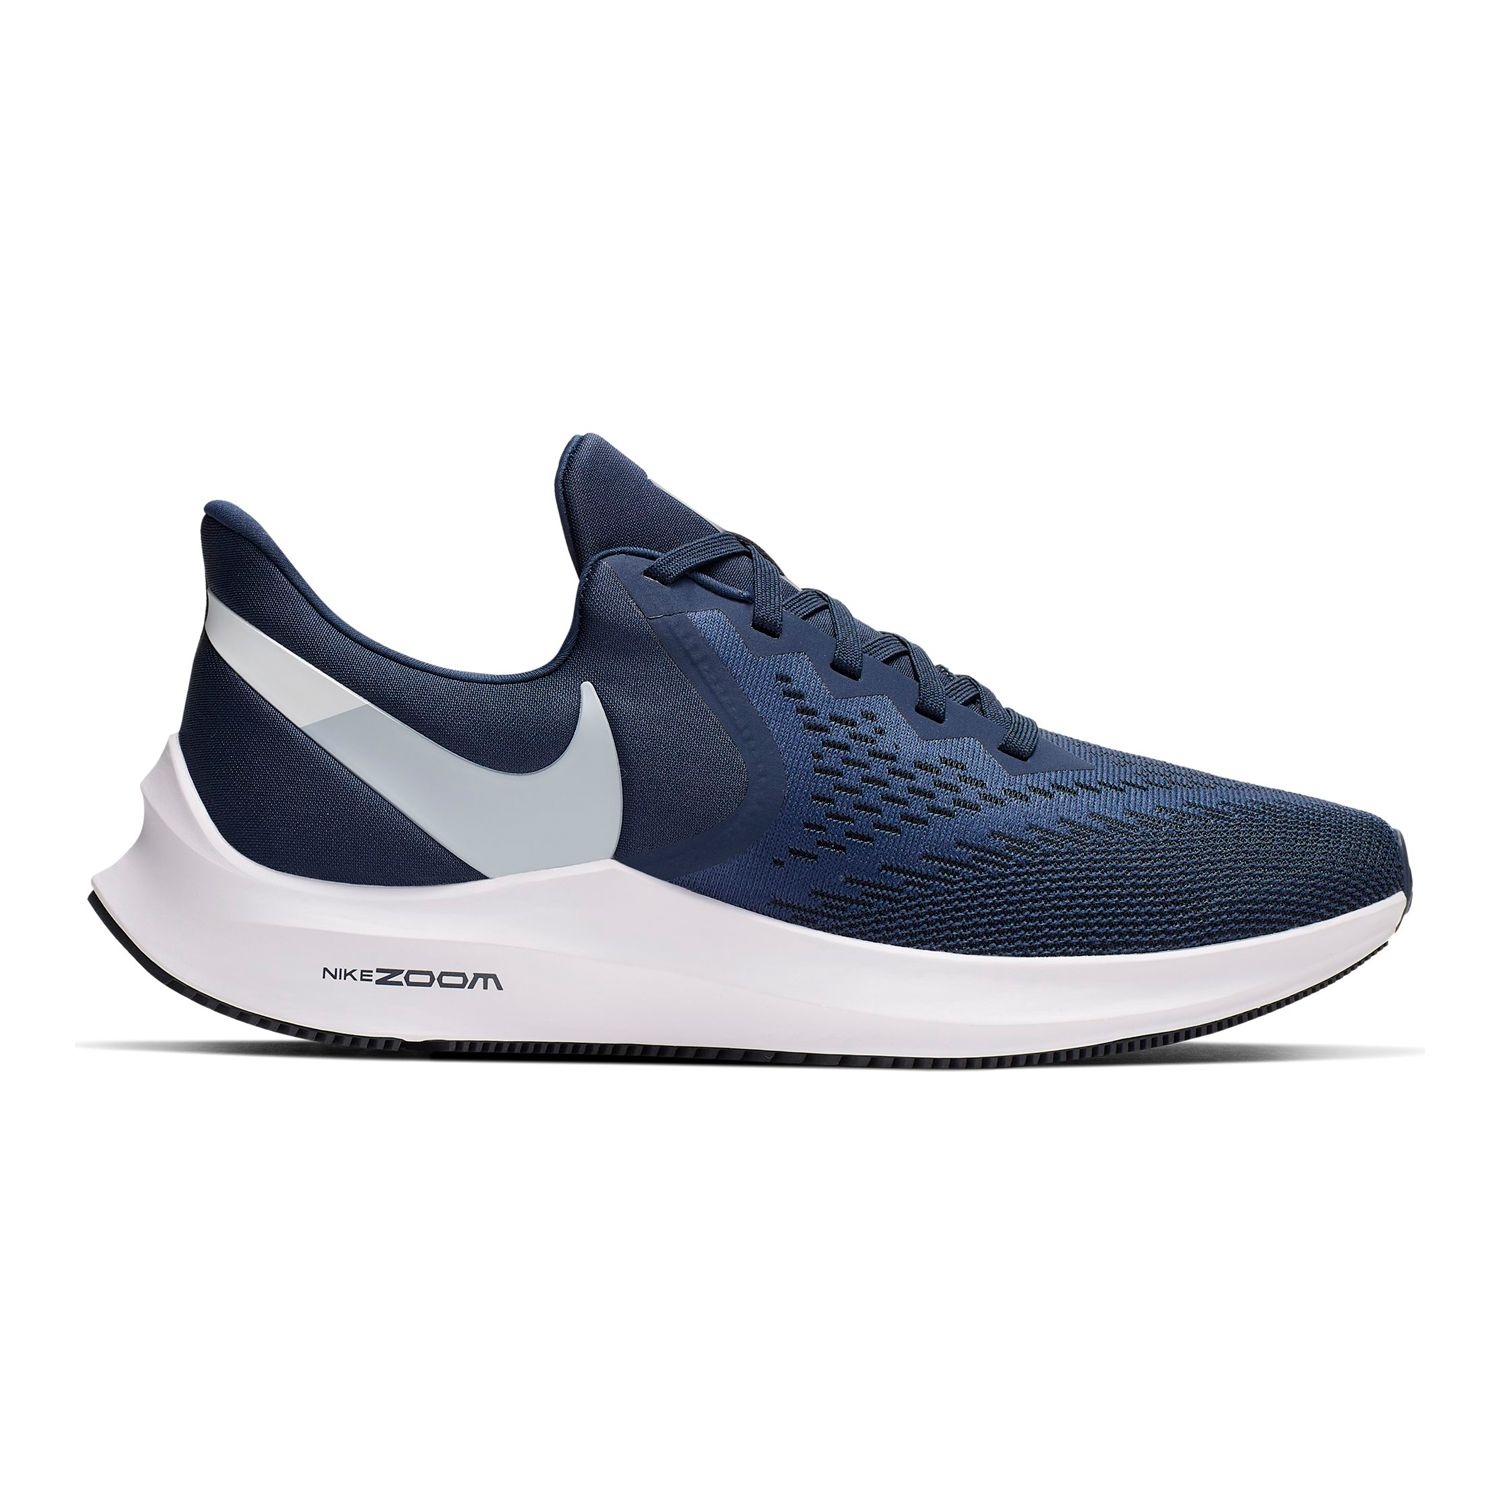 Nike Air Zoom Winflo 6 Men's Running Shoes